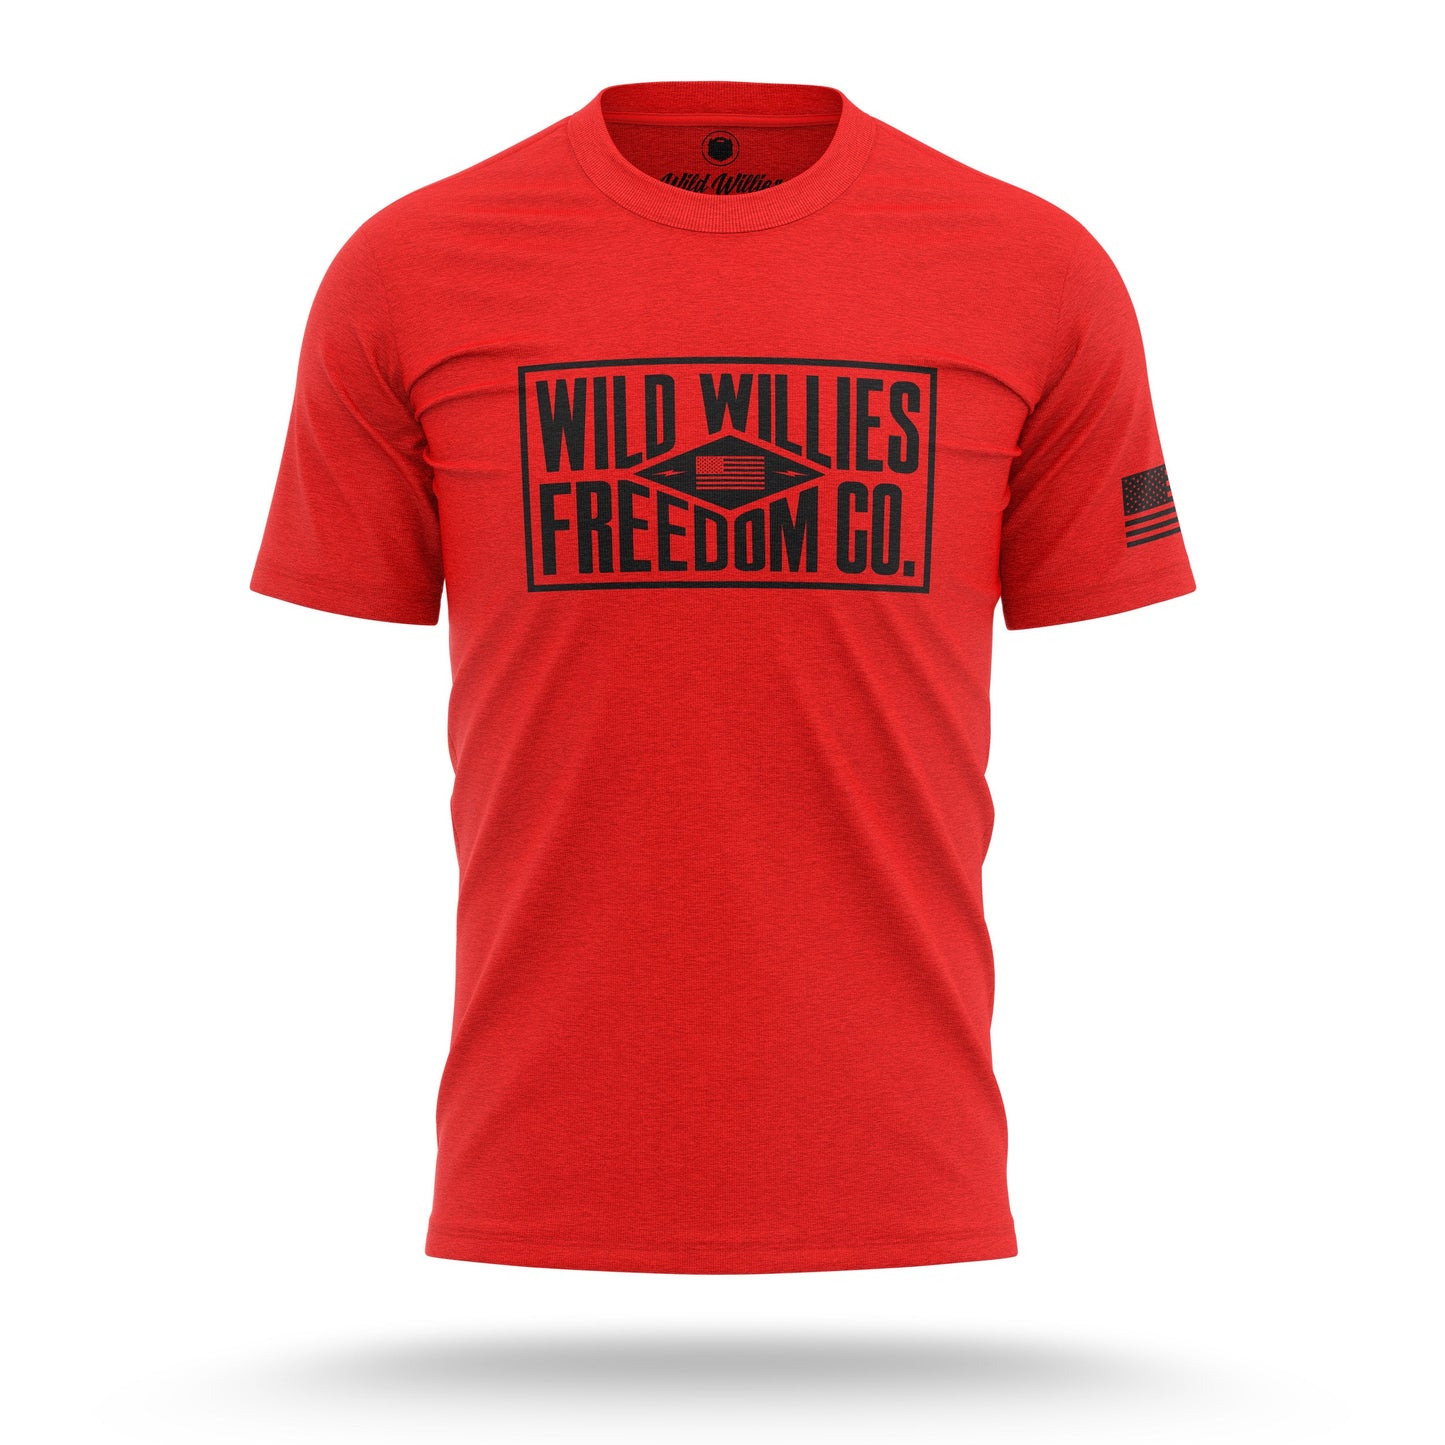 Freedom Company - T-Shirt T-Shirt Wild-Willies S Red 